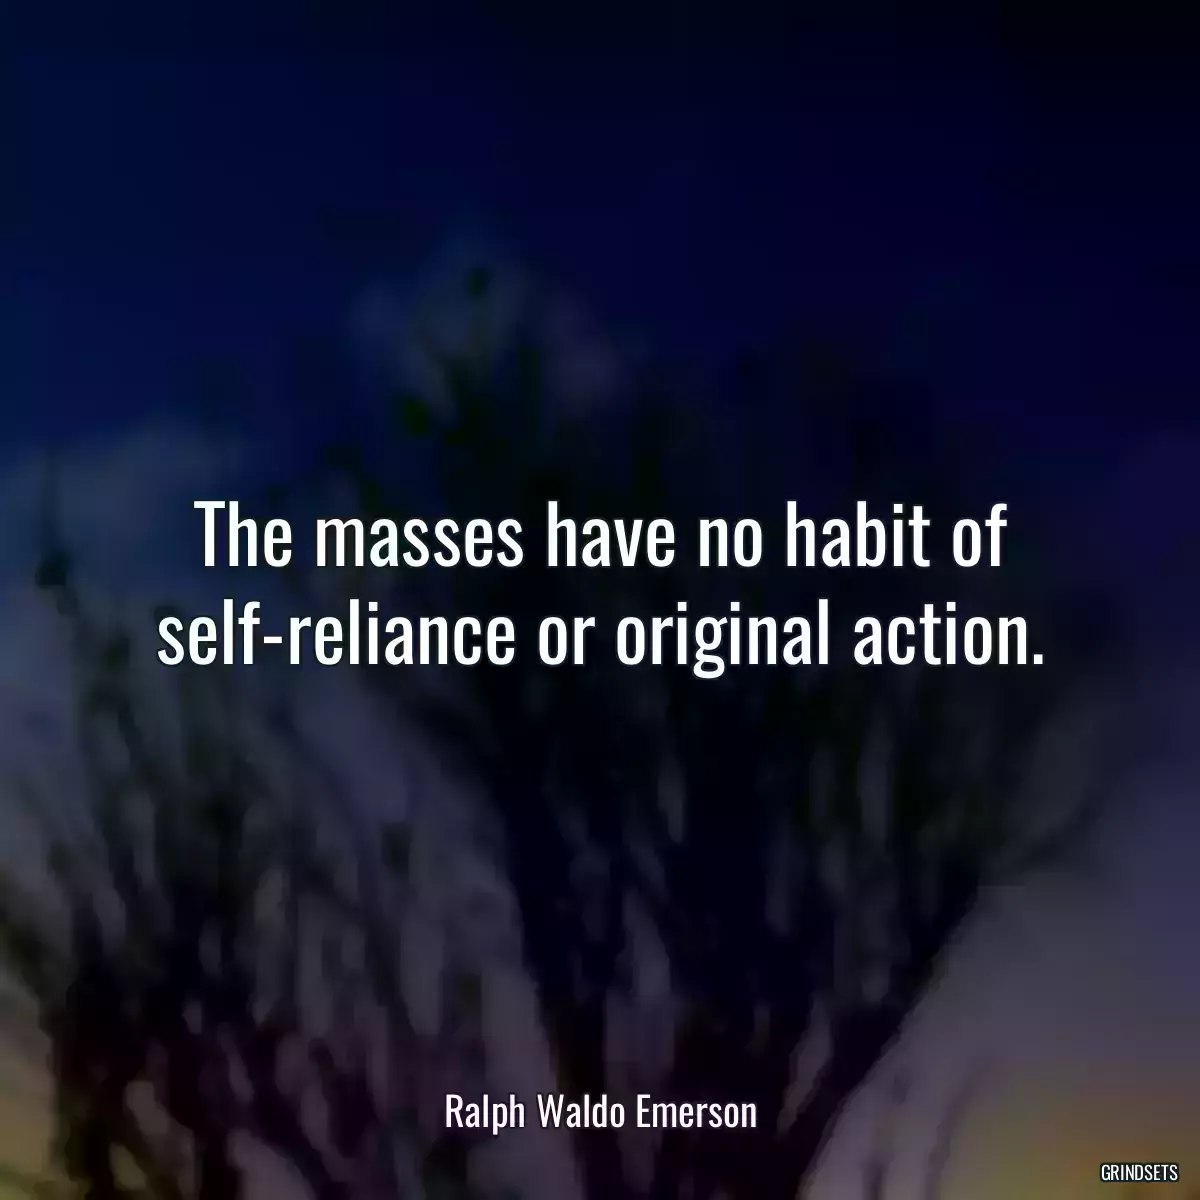 The masses have no habit of self-reliance or original action.